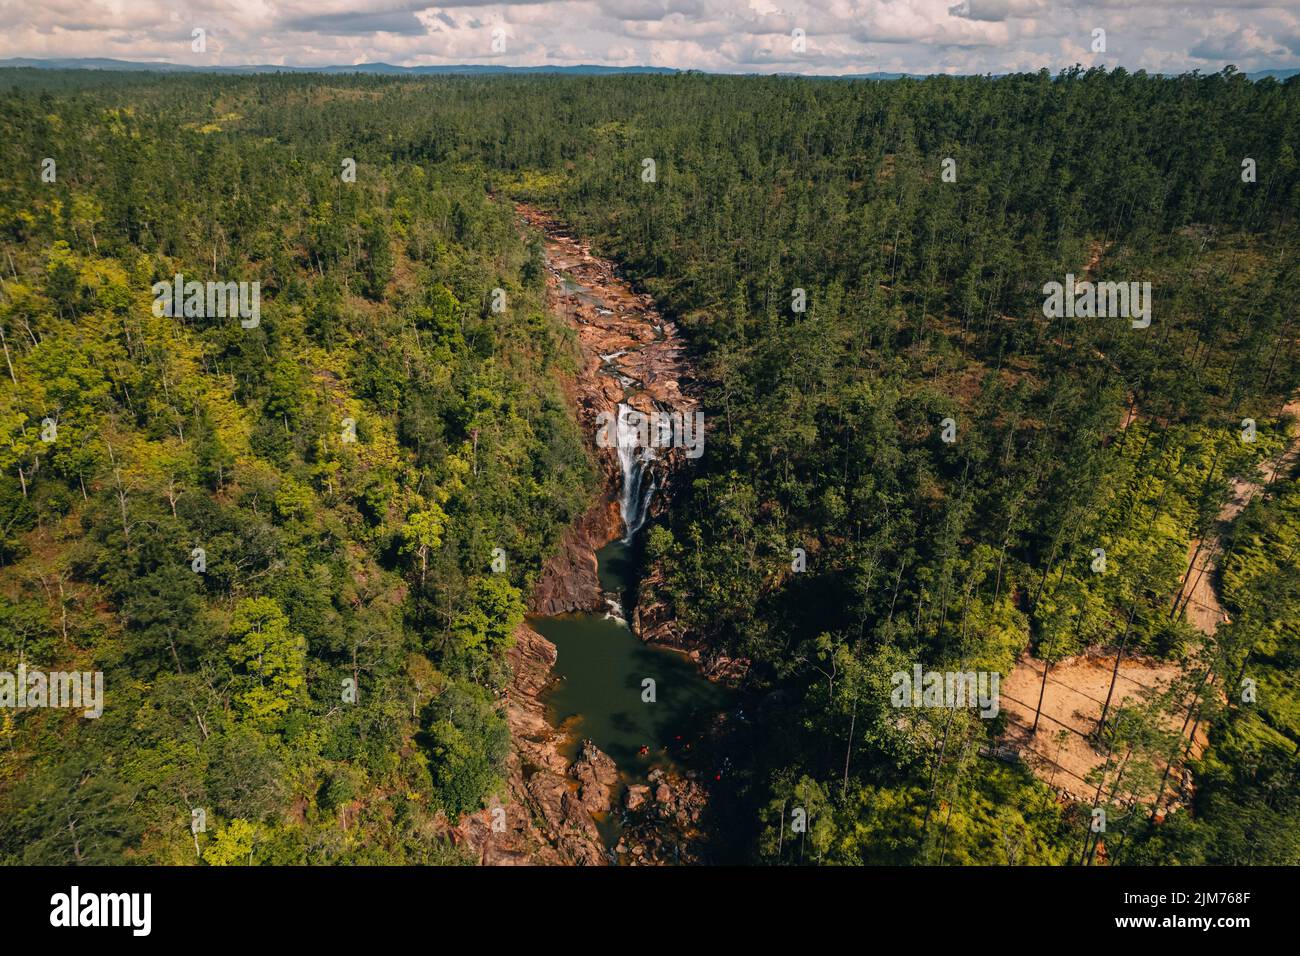 An aerial view of Big Rock Falls in Mountain Pine Ridge, Cayo District, Belize with green forest trees Stock Photo